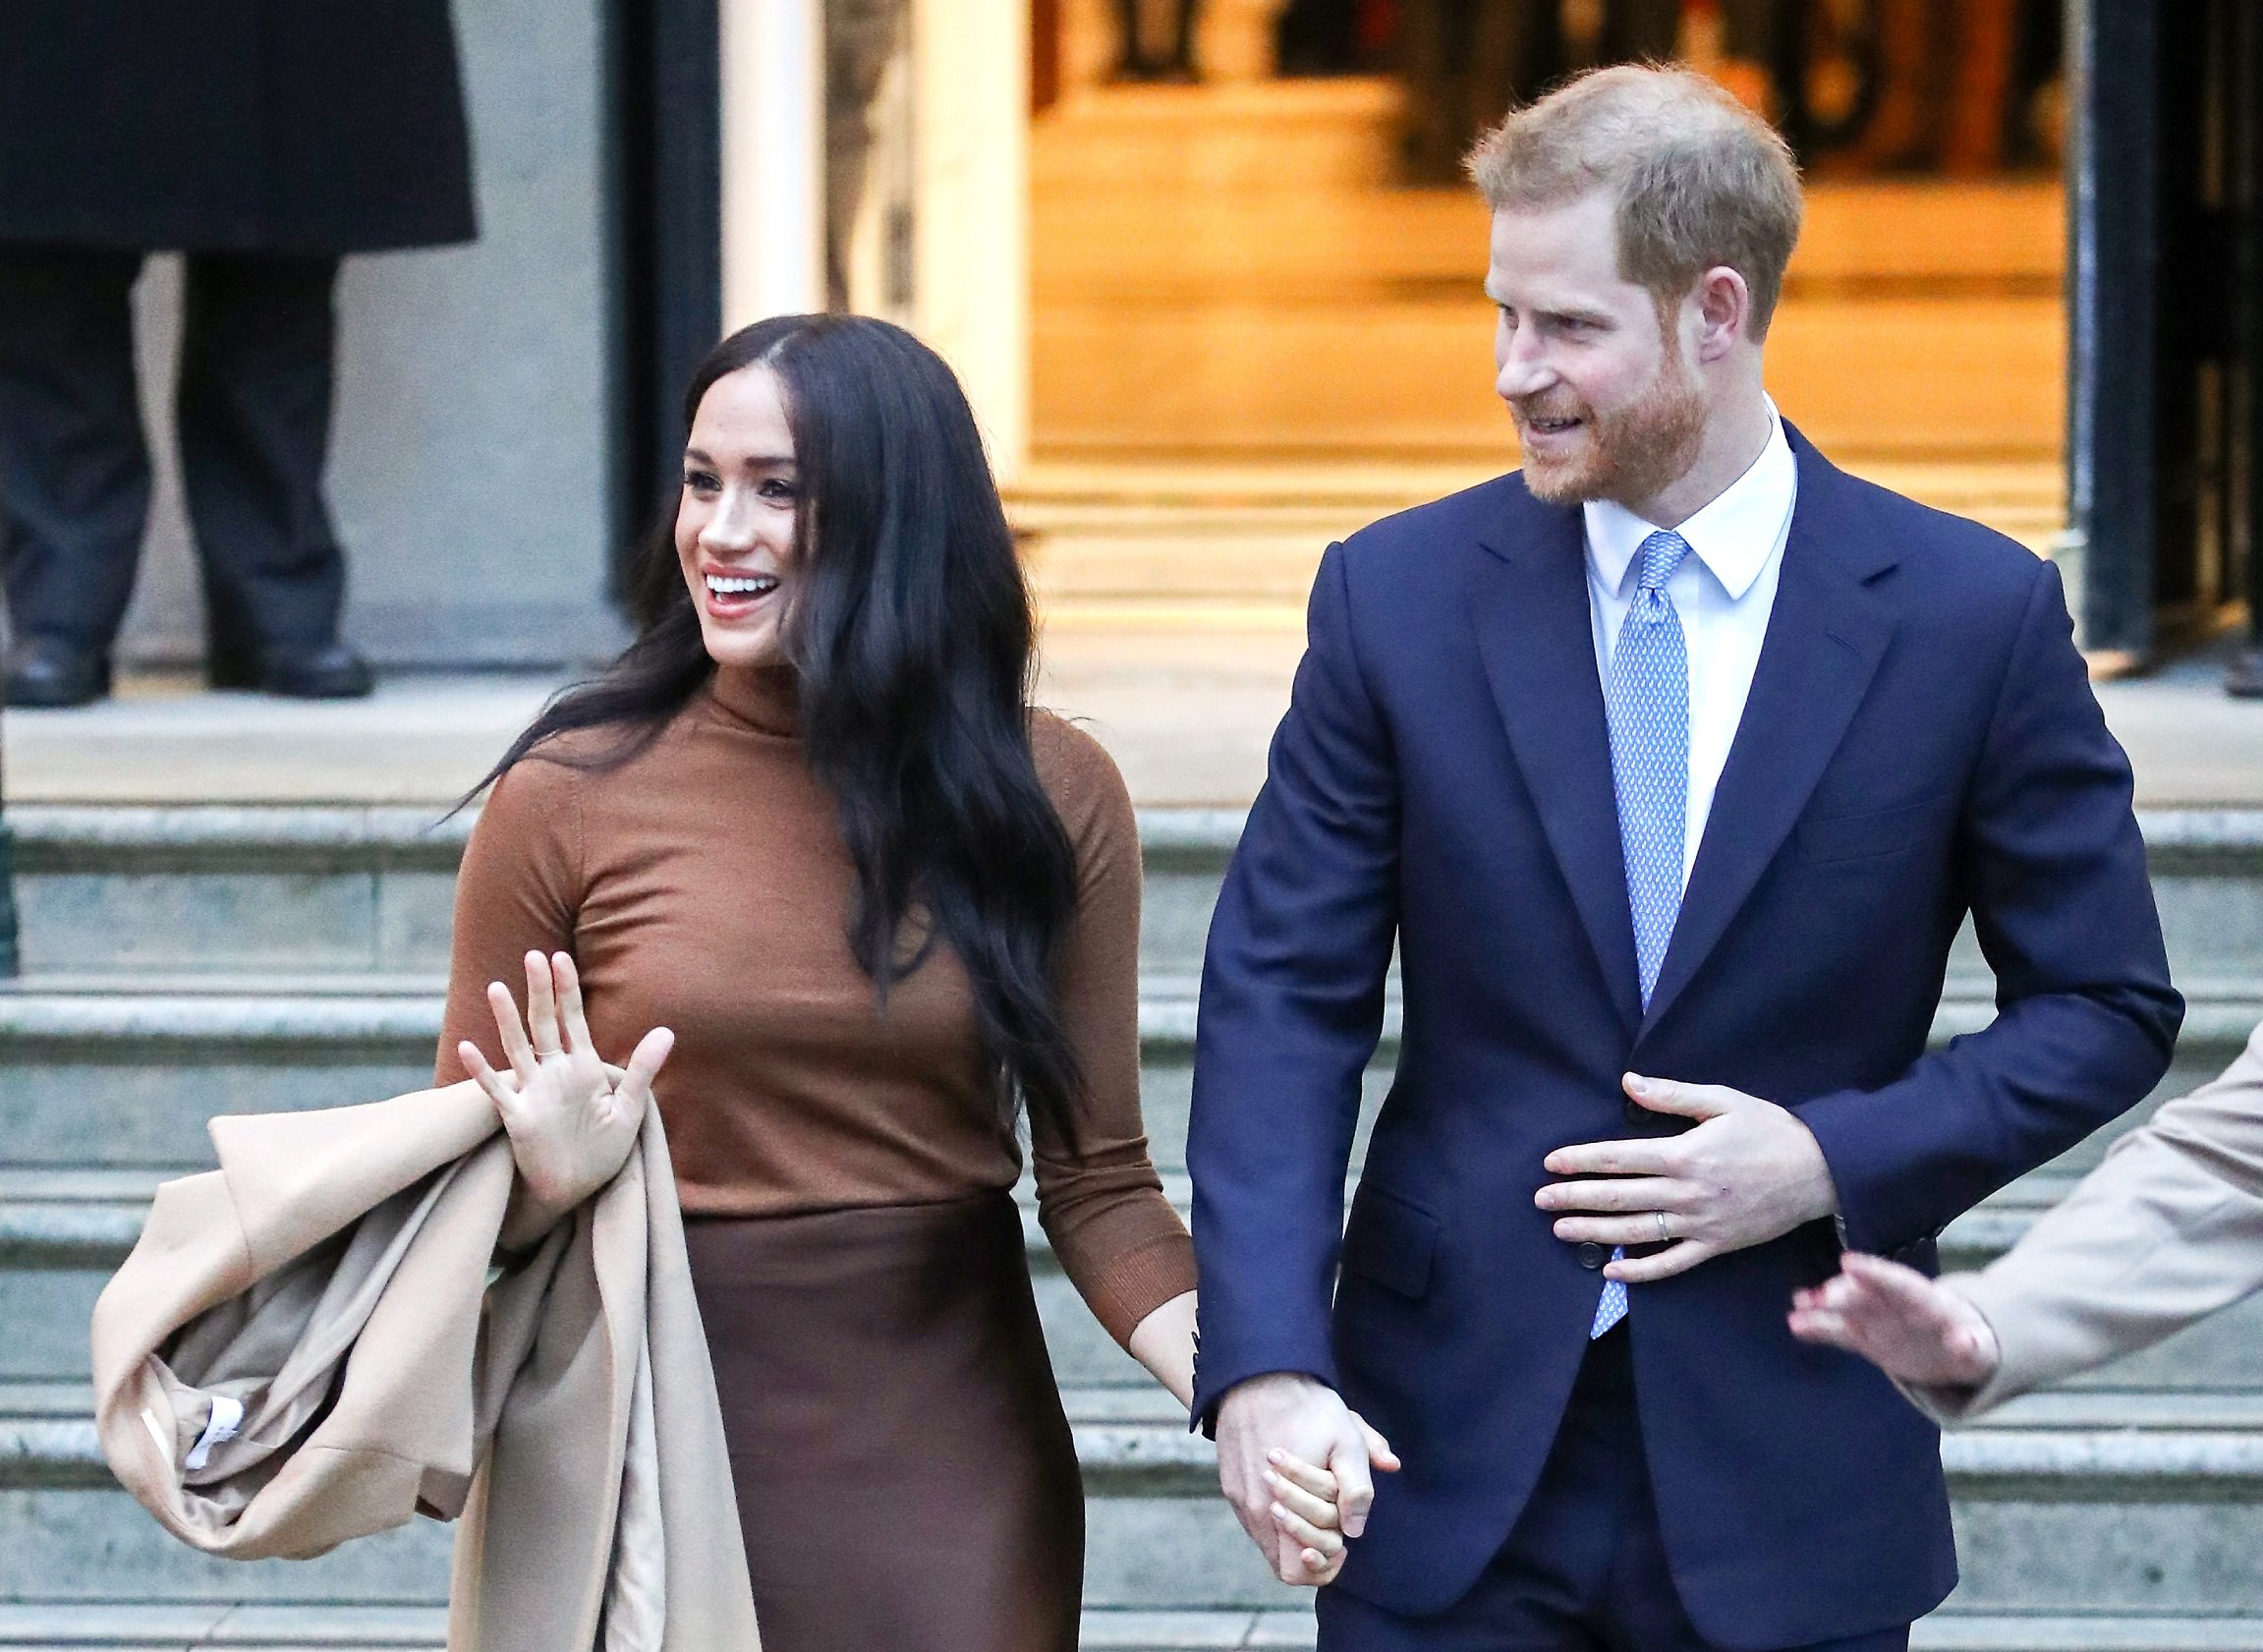 Meghan Markle and Prince Harry depart Canada House on January 07, 2020, in London, England. | Source: Getty Images.